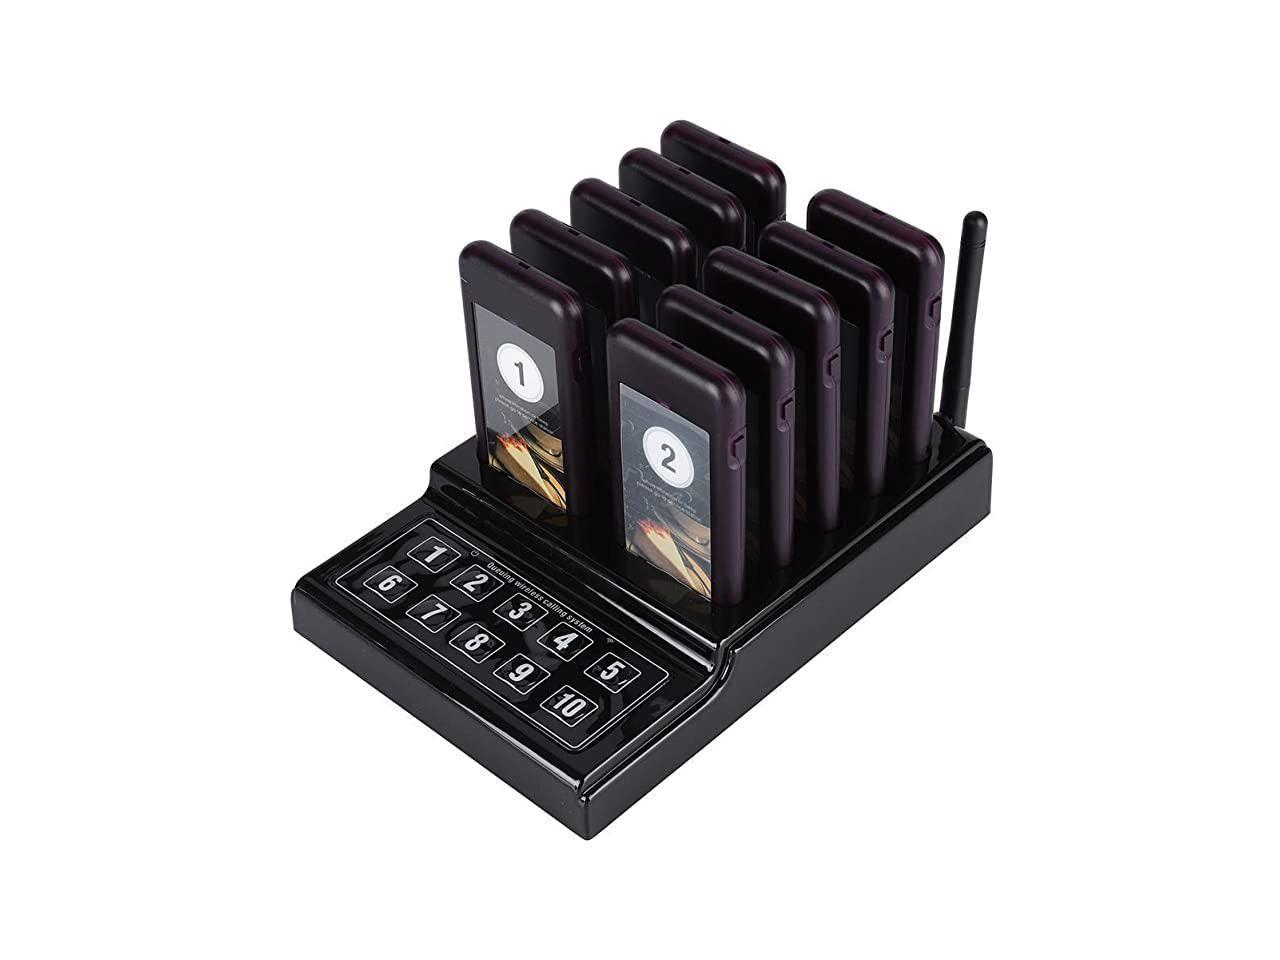 Restaurant Wireless Guest Paging Queuing System 1*Transmitter+10*Pagers 433.92MH 